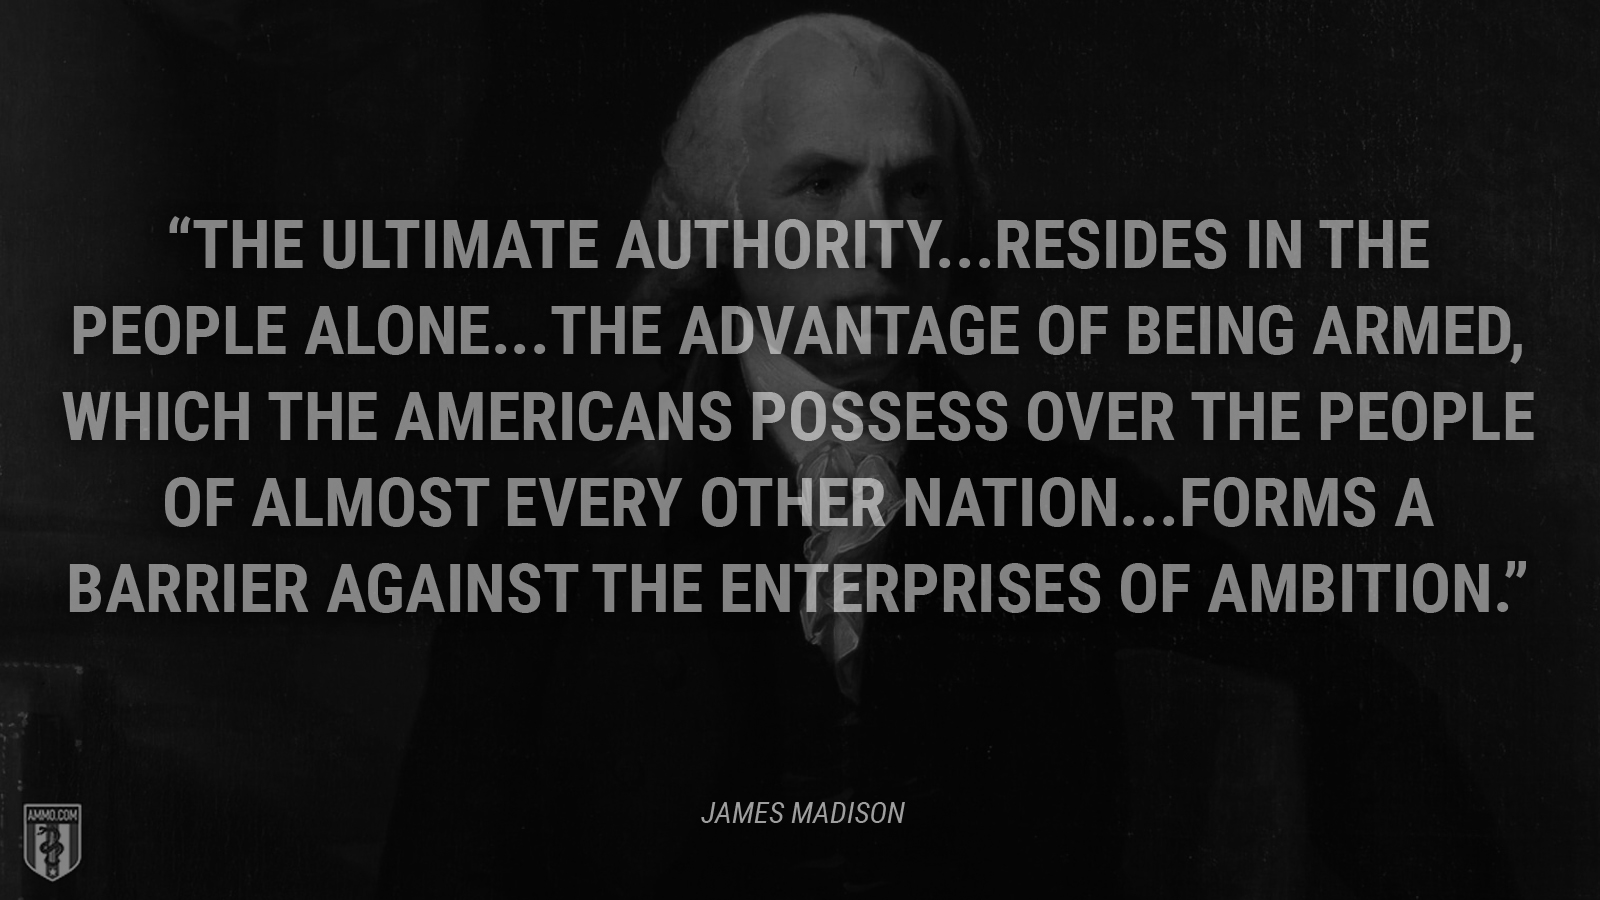 “The ultimate authority...resides in the people alone...The advantage of being armed, which the Americans possess over the people of almost every other nation...forms a barrier against the enterprises of ambition.” - James Madison